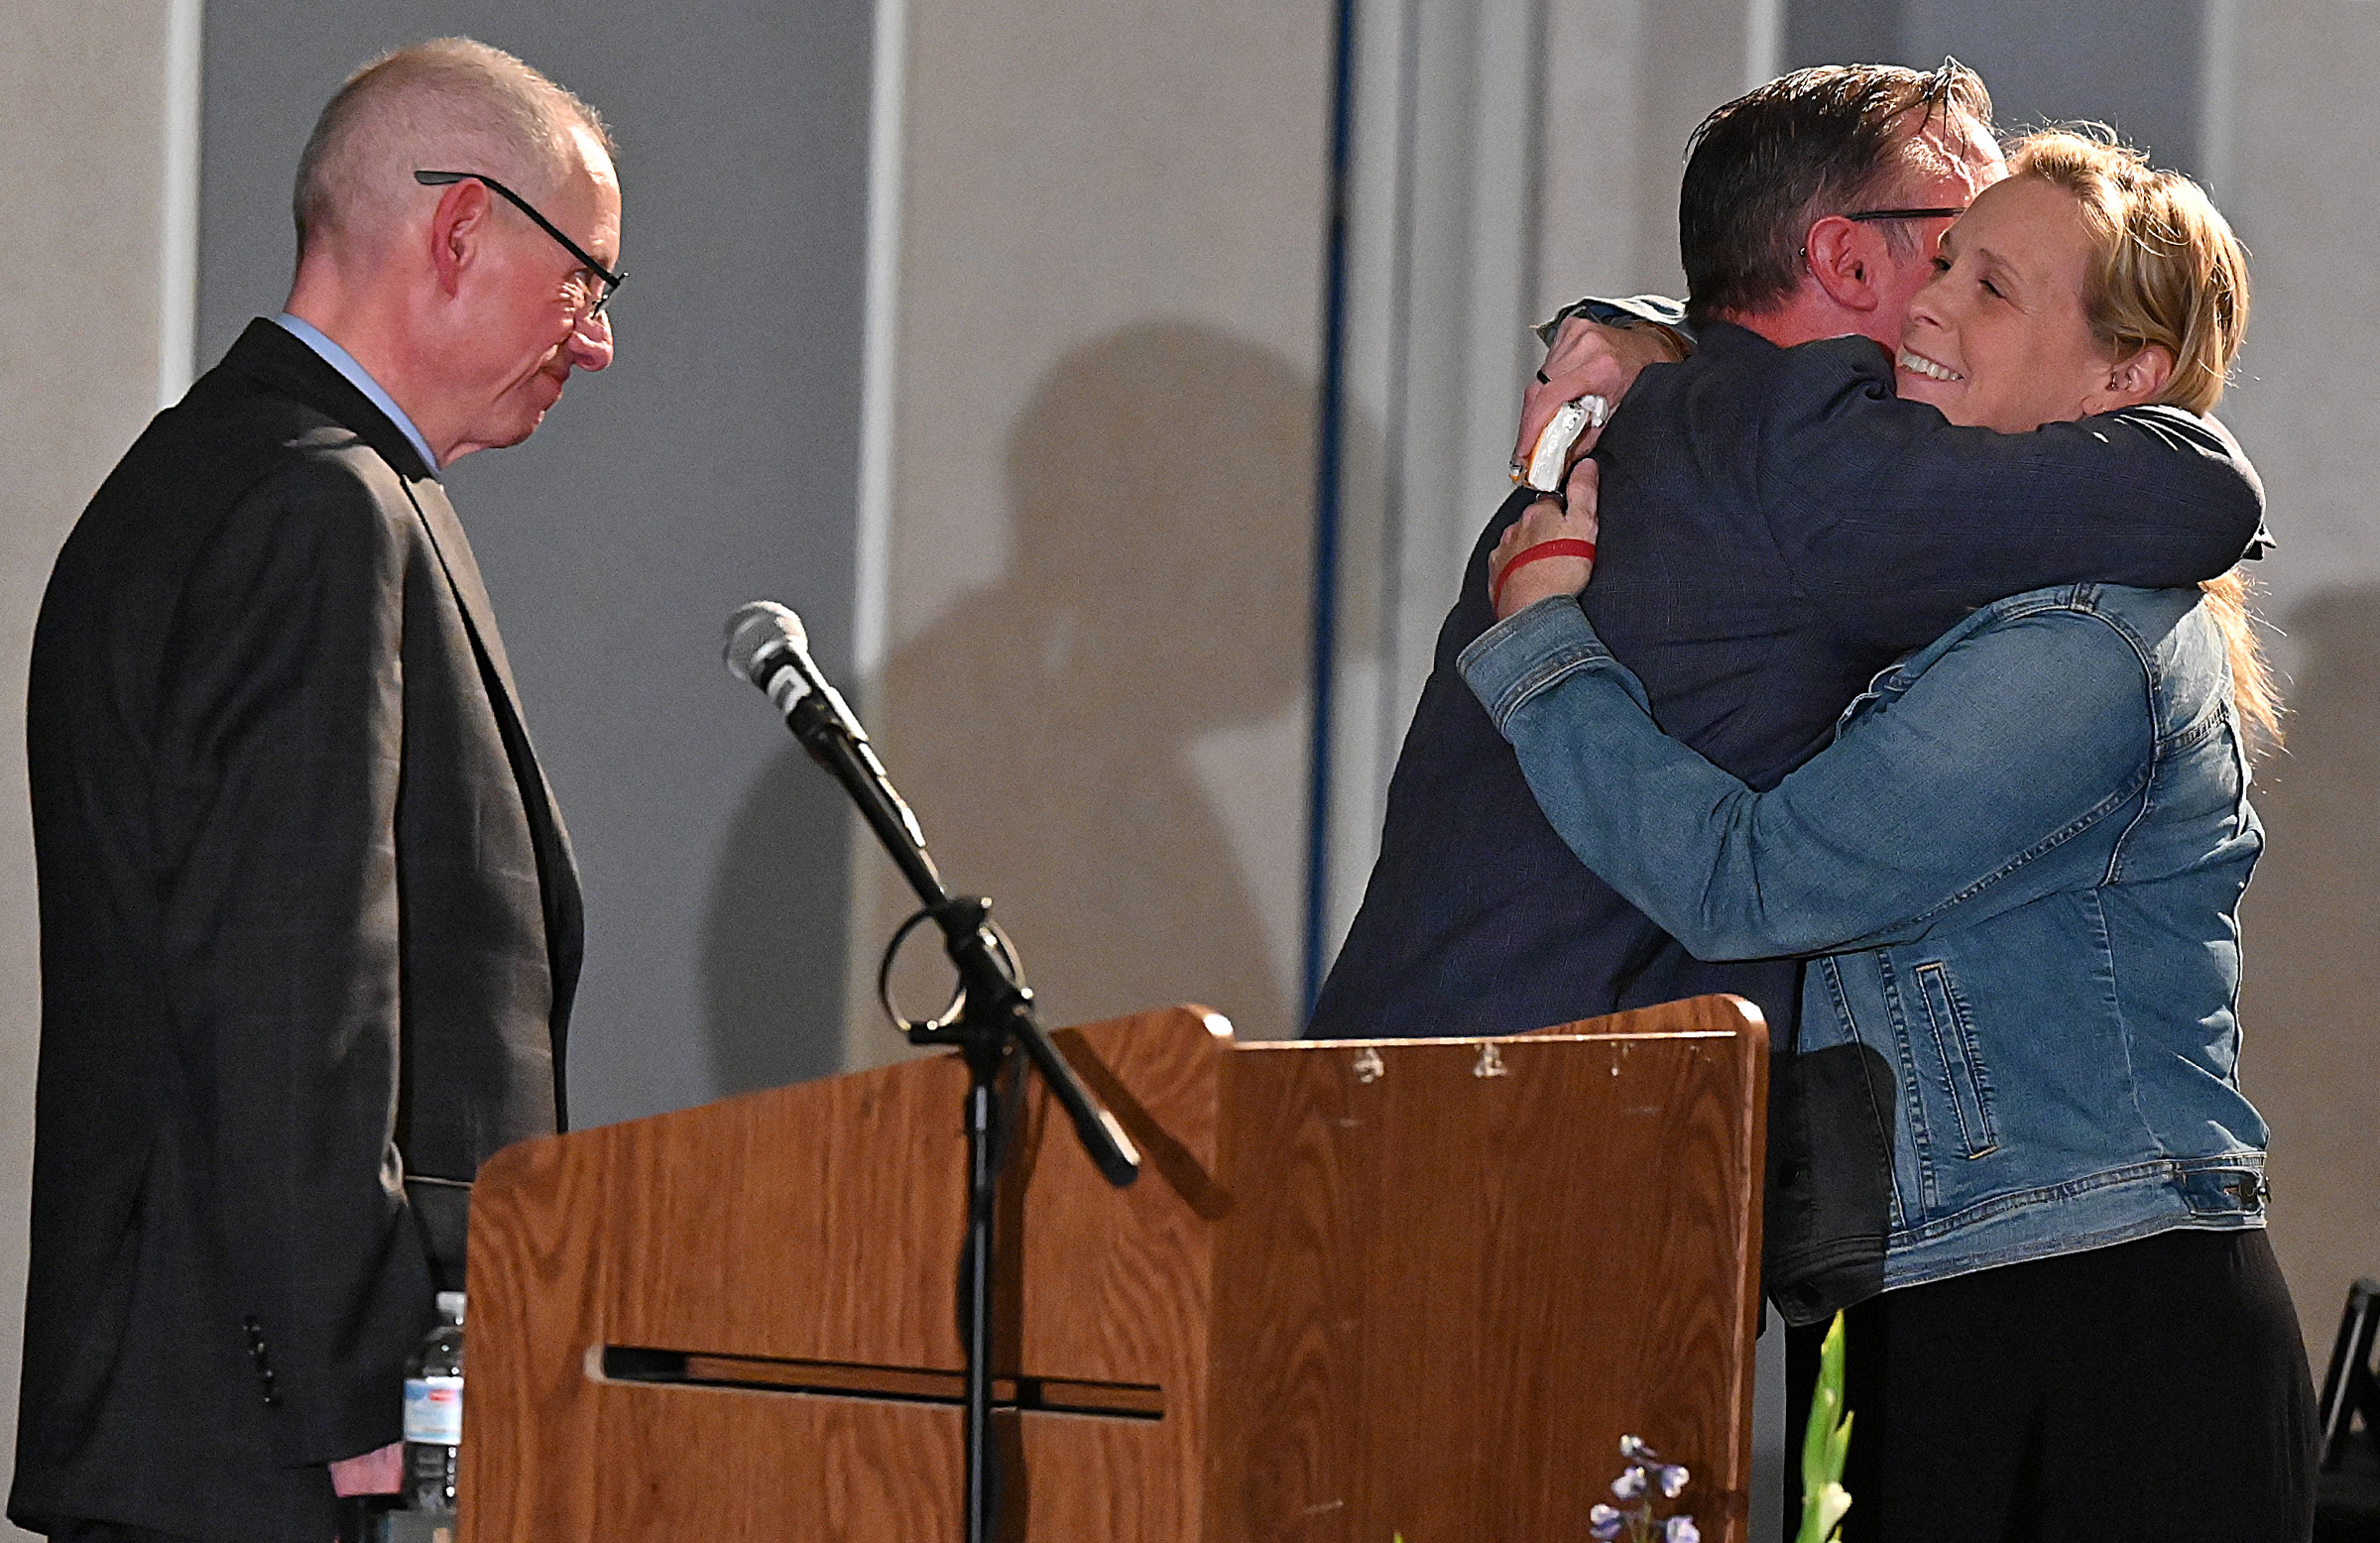 Margie Neighoff, Peer Recovery Coach at Carroll Hospital Center, is hugged by Tim Weber after receiving the "Bob Kirkland Award" at the 9th Annual Drug Overdose and Prevention Vigil Tuesday at Portico at St. John in Westminster. (Jeffrey F. Bill/Staff photo)